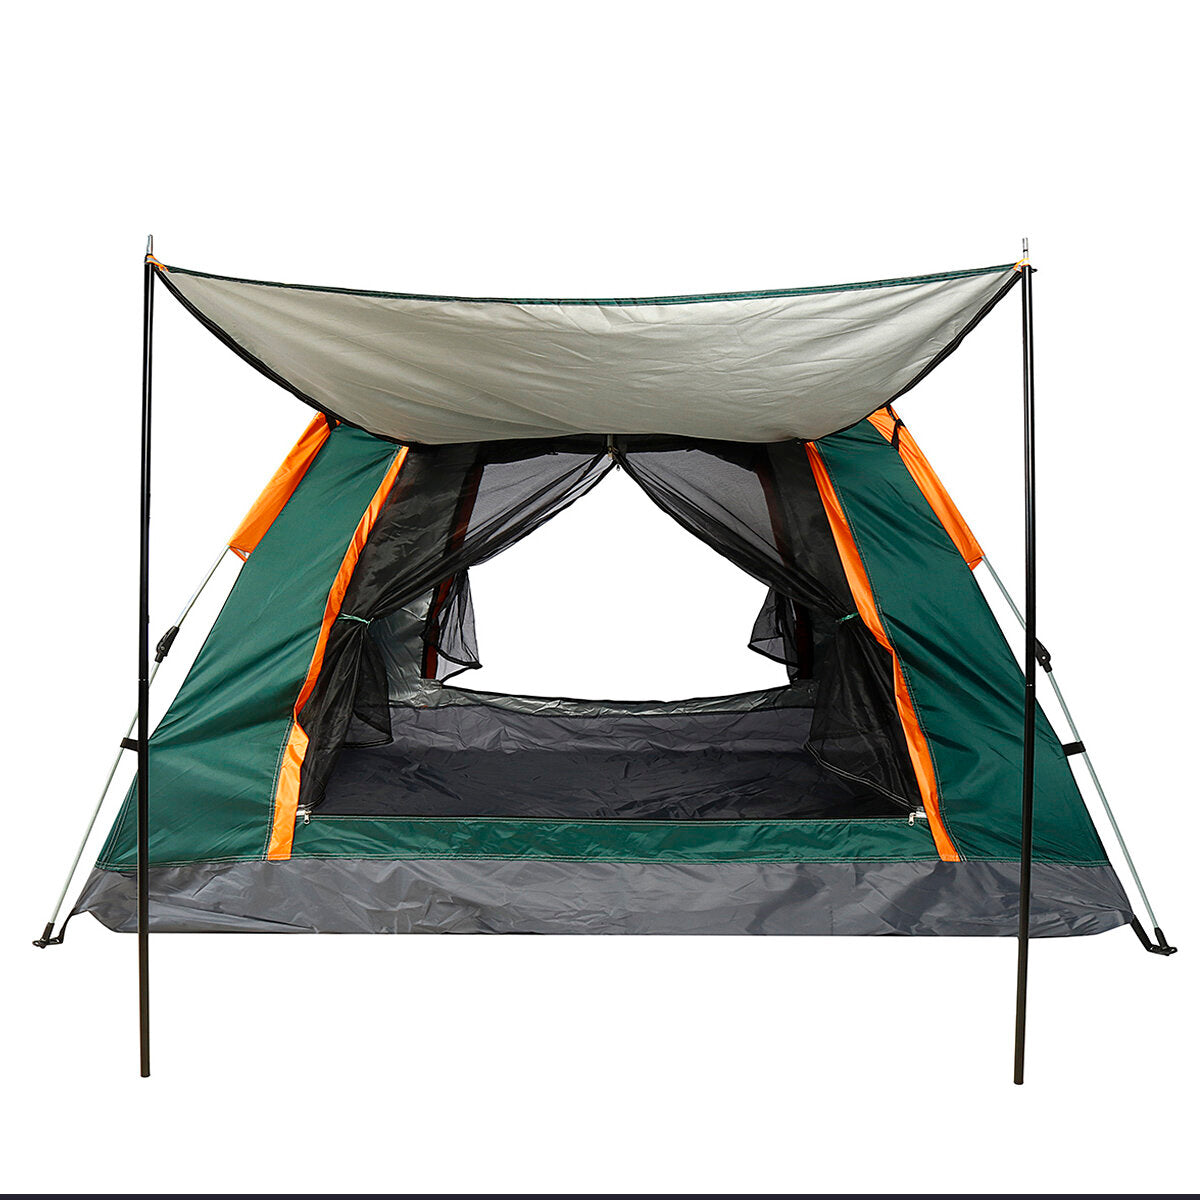 Automatic Speed-open Camping Tent 210T Oxford Cloth Double Deck Sun Protection Waterproof Tent Sun Shelter Open Up Tent For Hiking Climbing